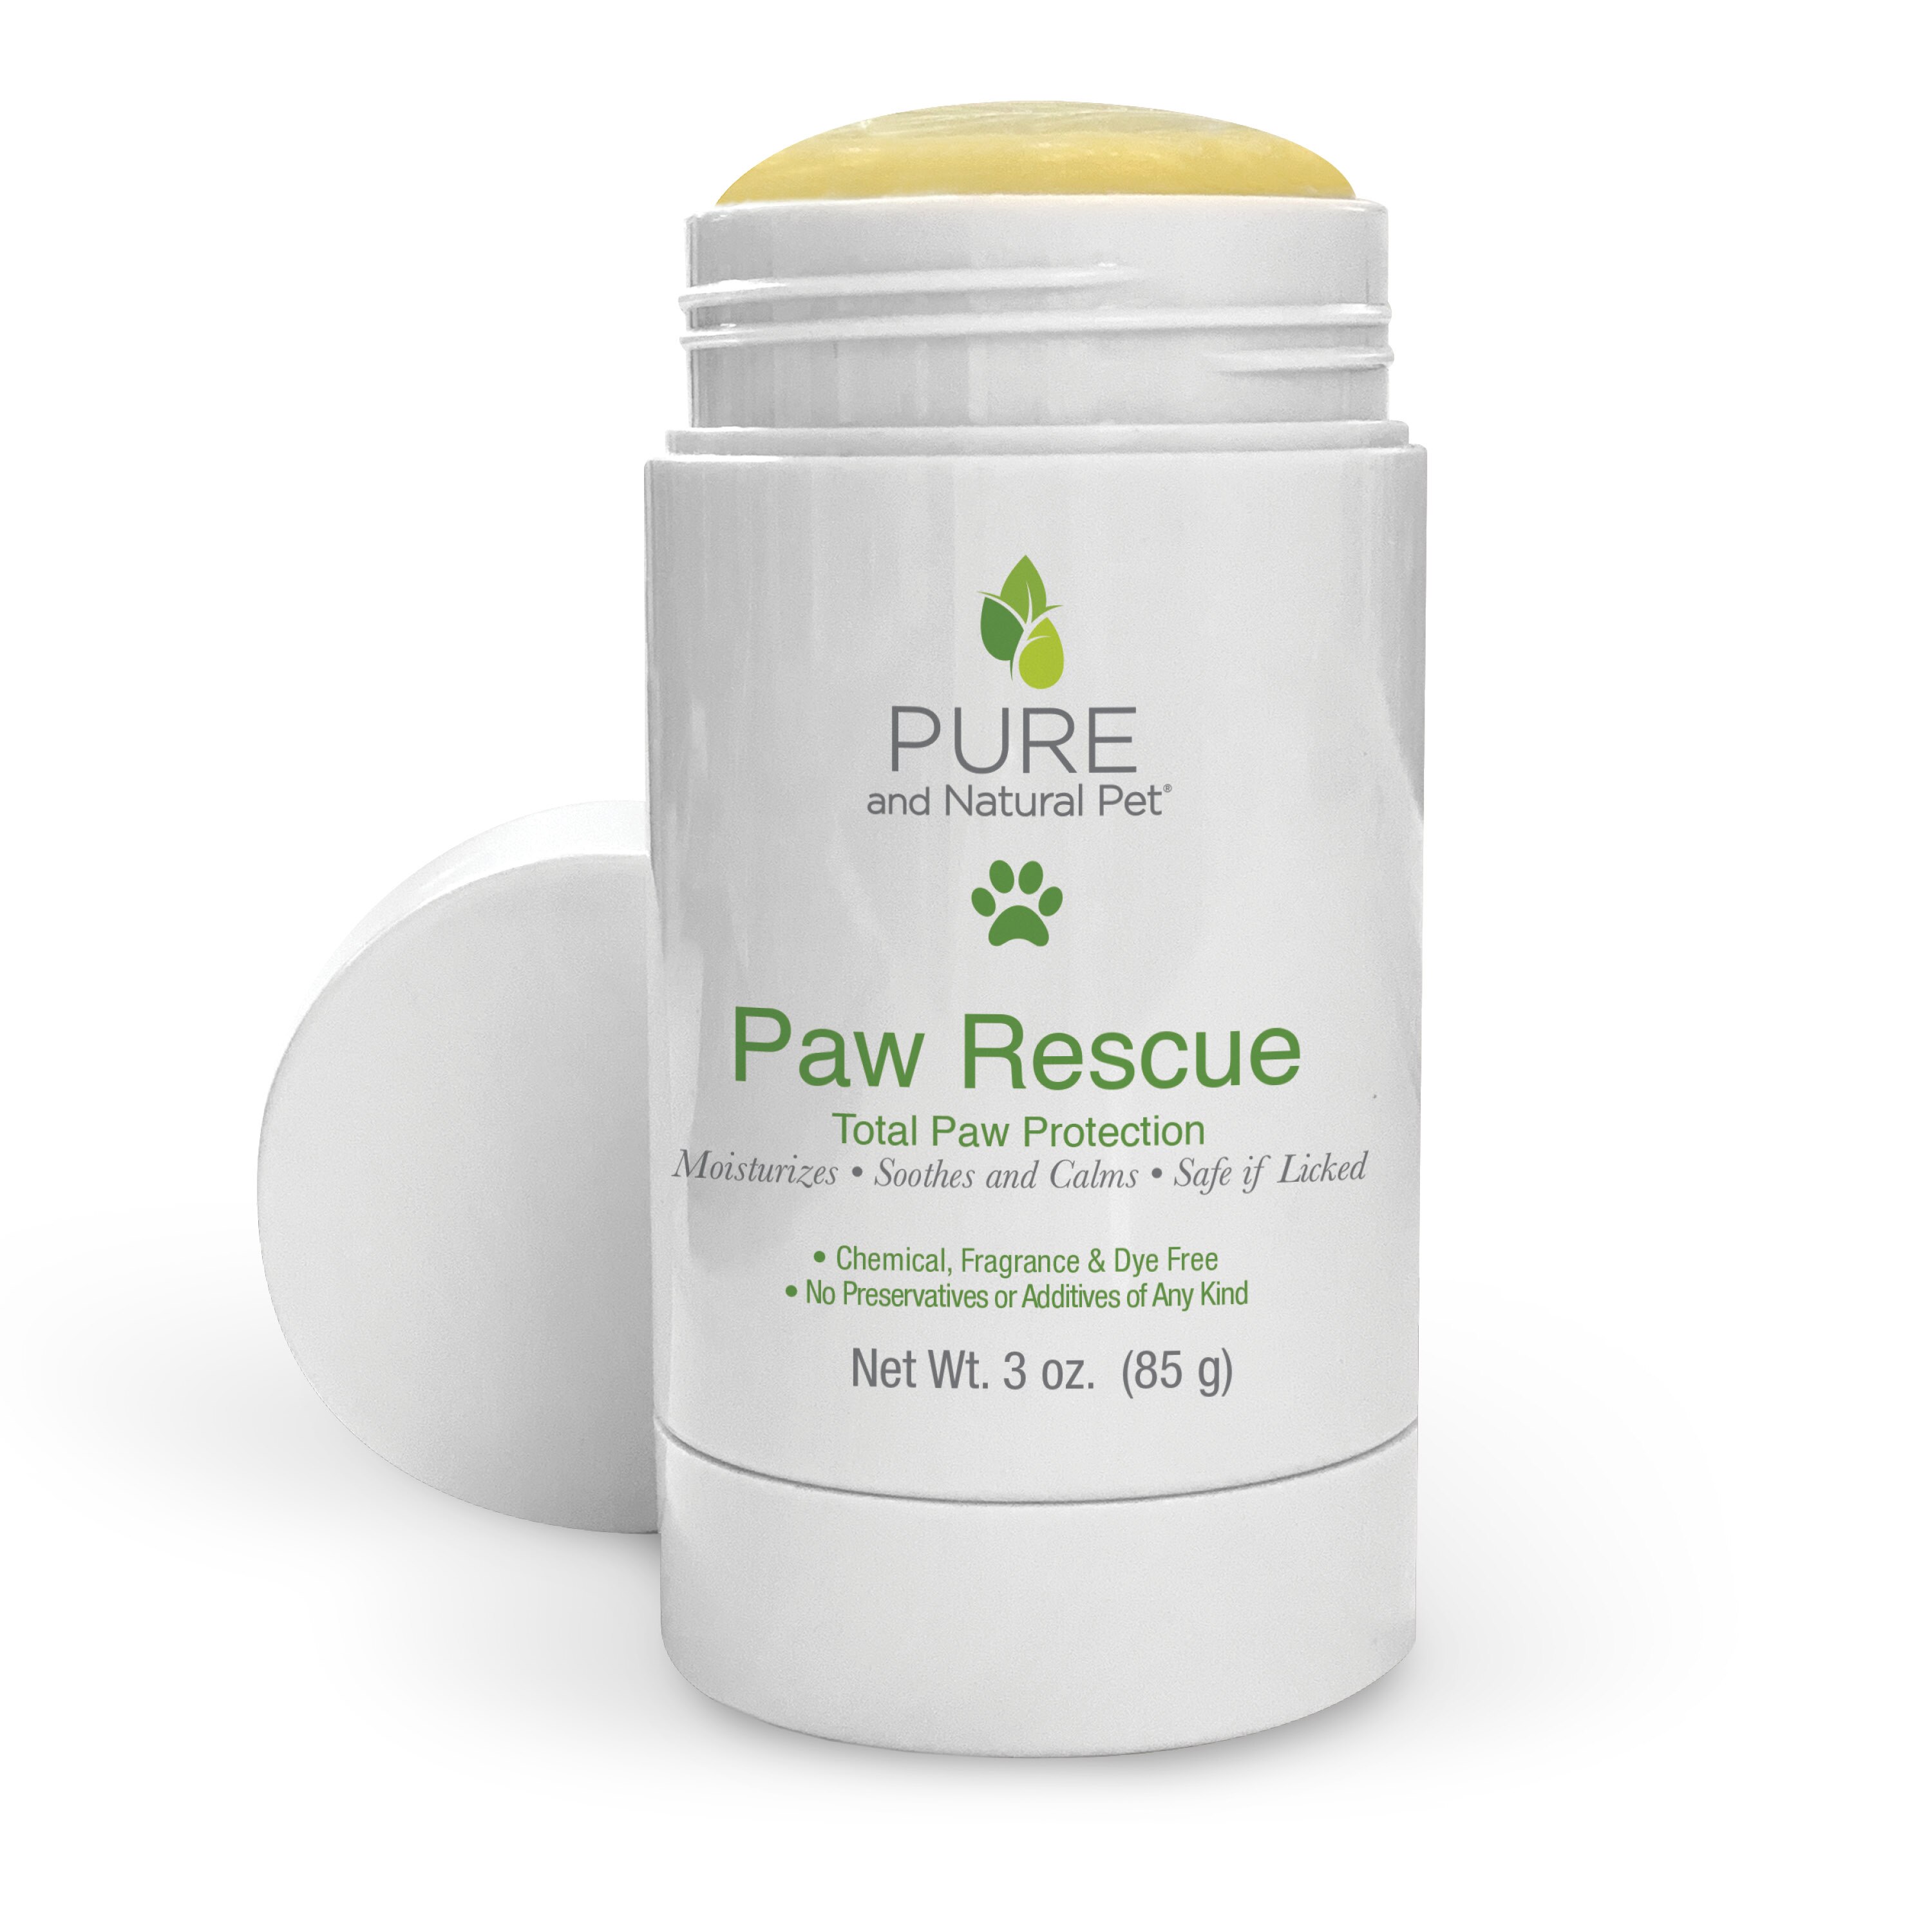 Pure and Natural Pet Paw Rescue